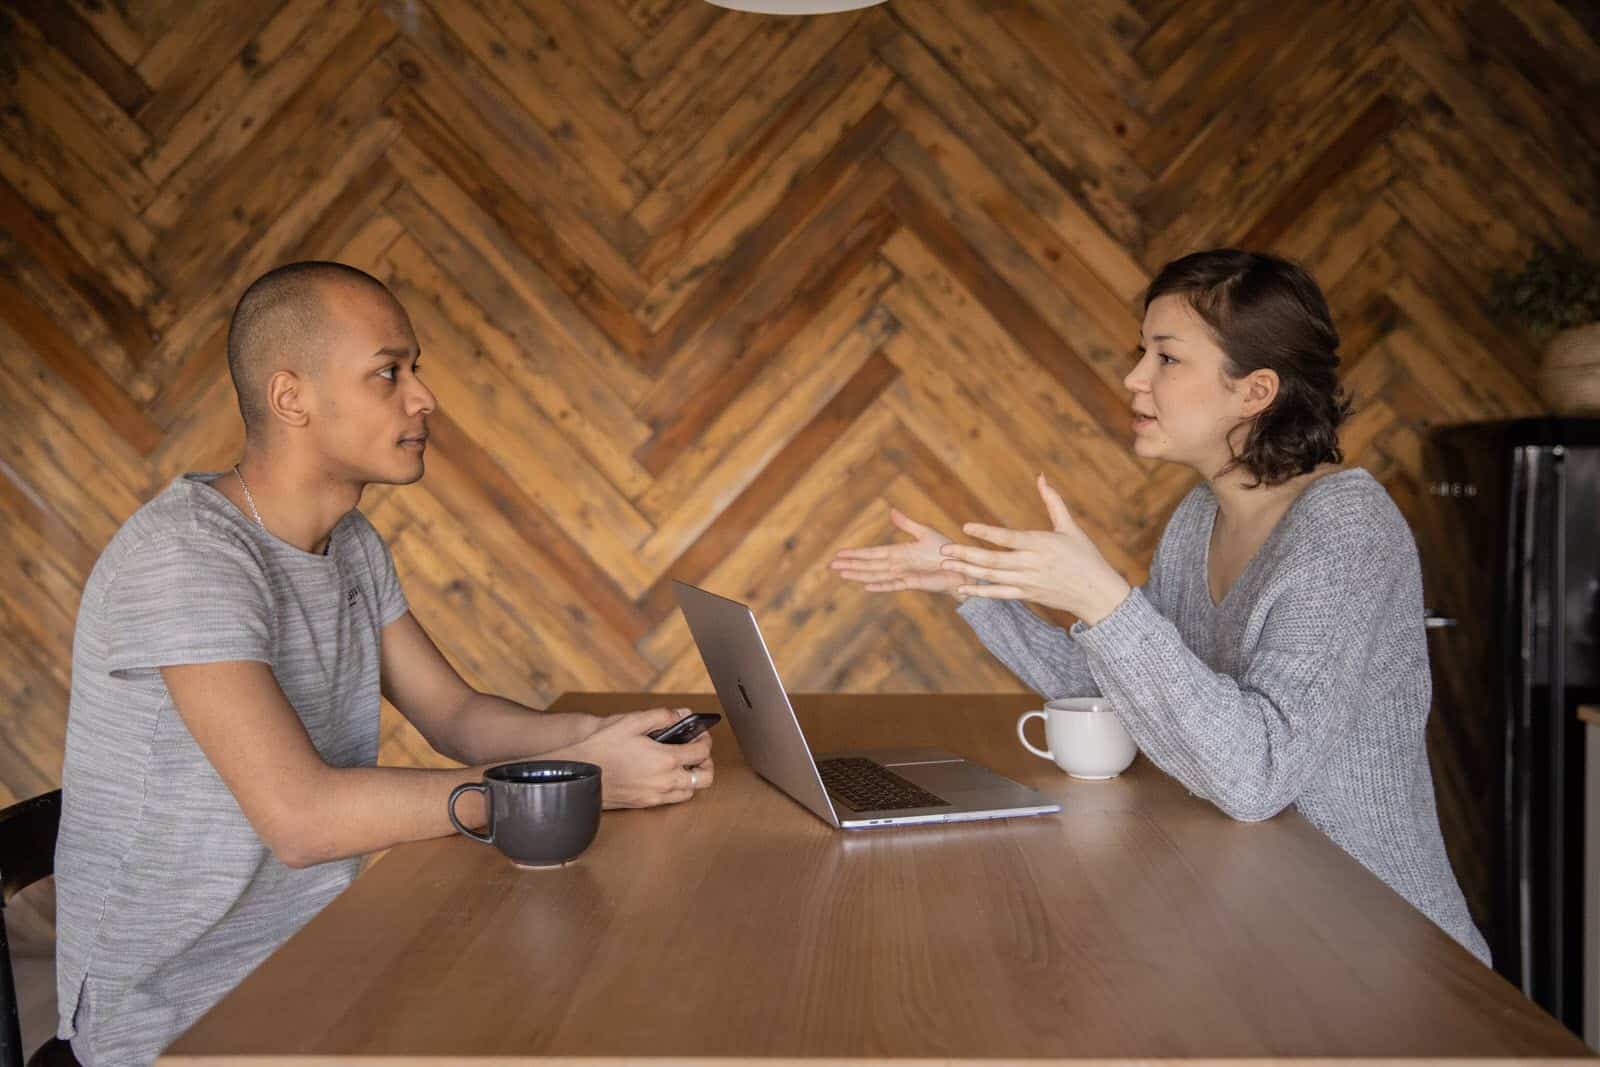 two people in discussion seated at a table, with coffee, phone, laptop